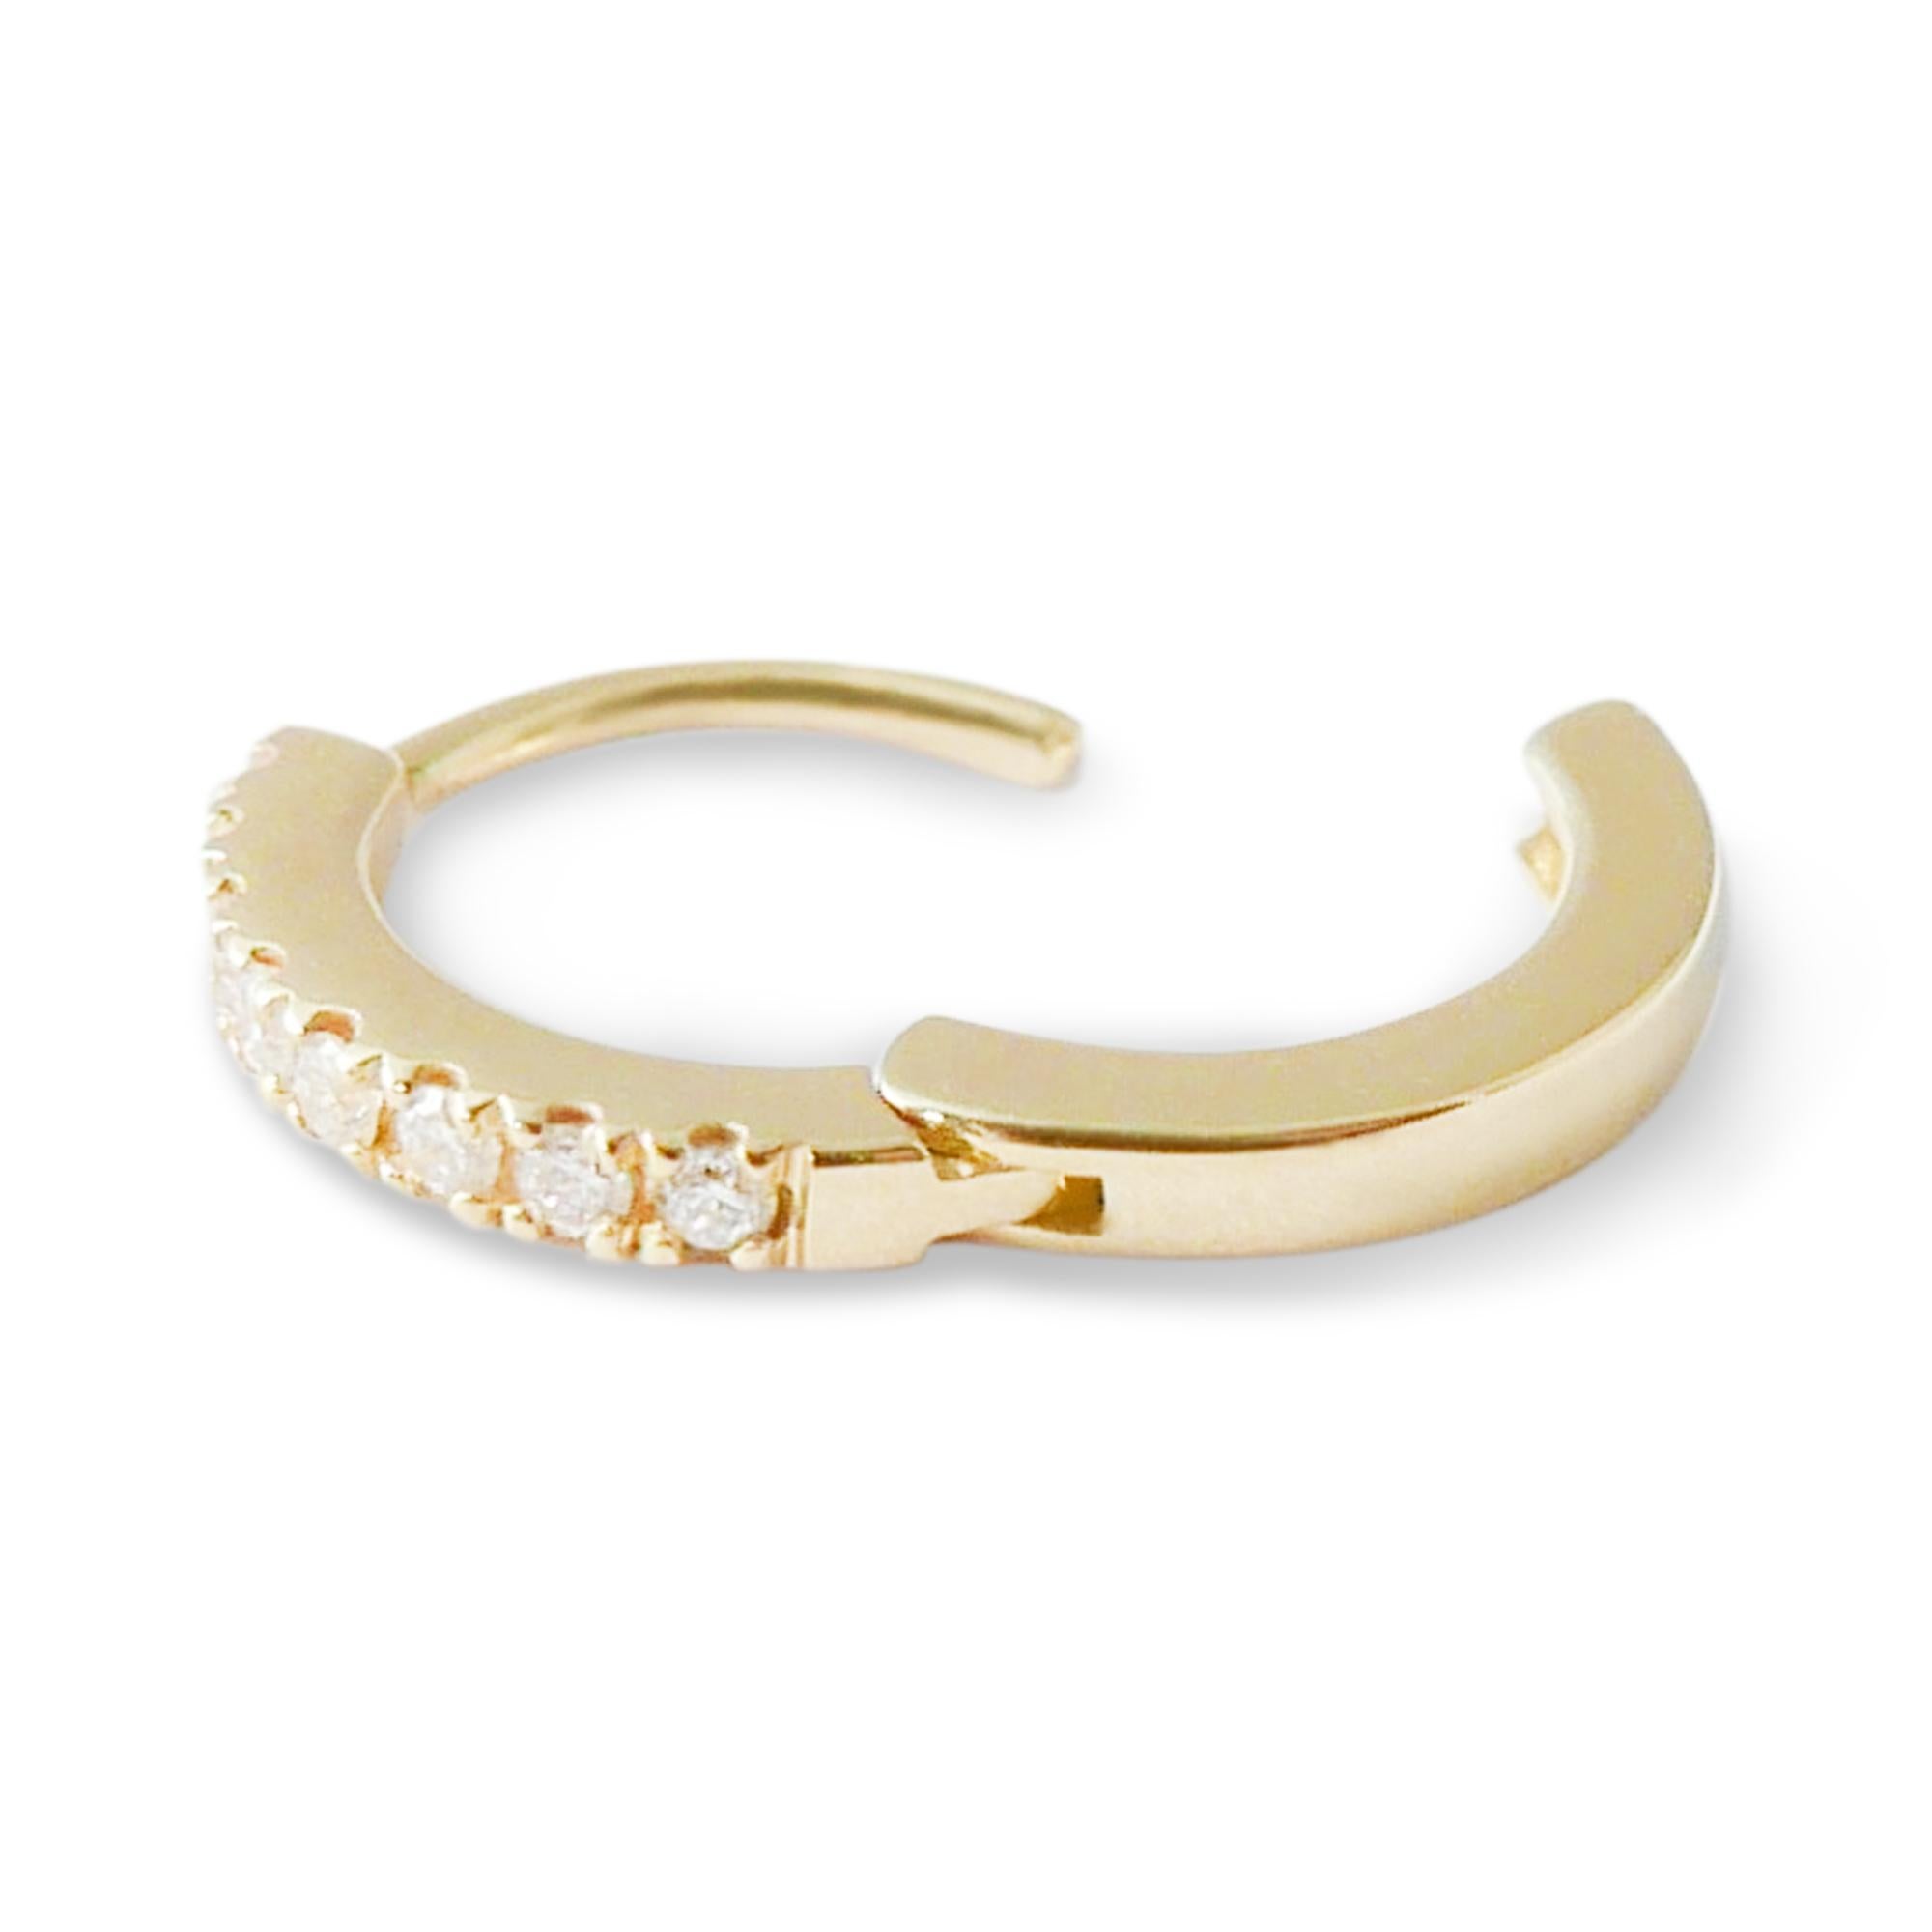 This pair of delicate huggie hoop earrings is crafted in 18-karat gold and set with 0.06 carats of white pave diamonds.  The earrings feature a classic 18-karat yellow gold pave setting and a click post fastening for a secure and close fit. 